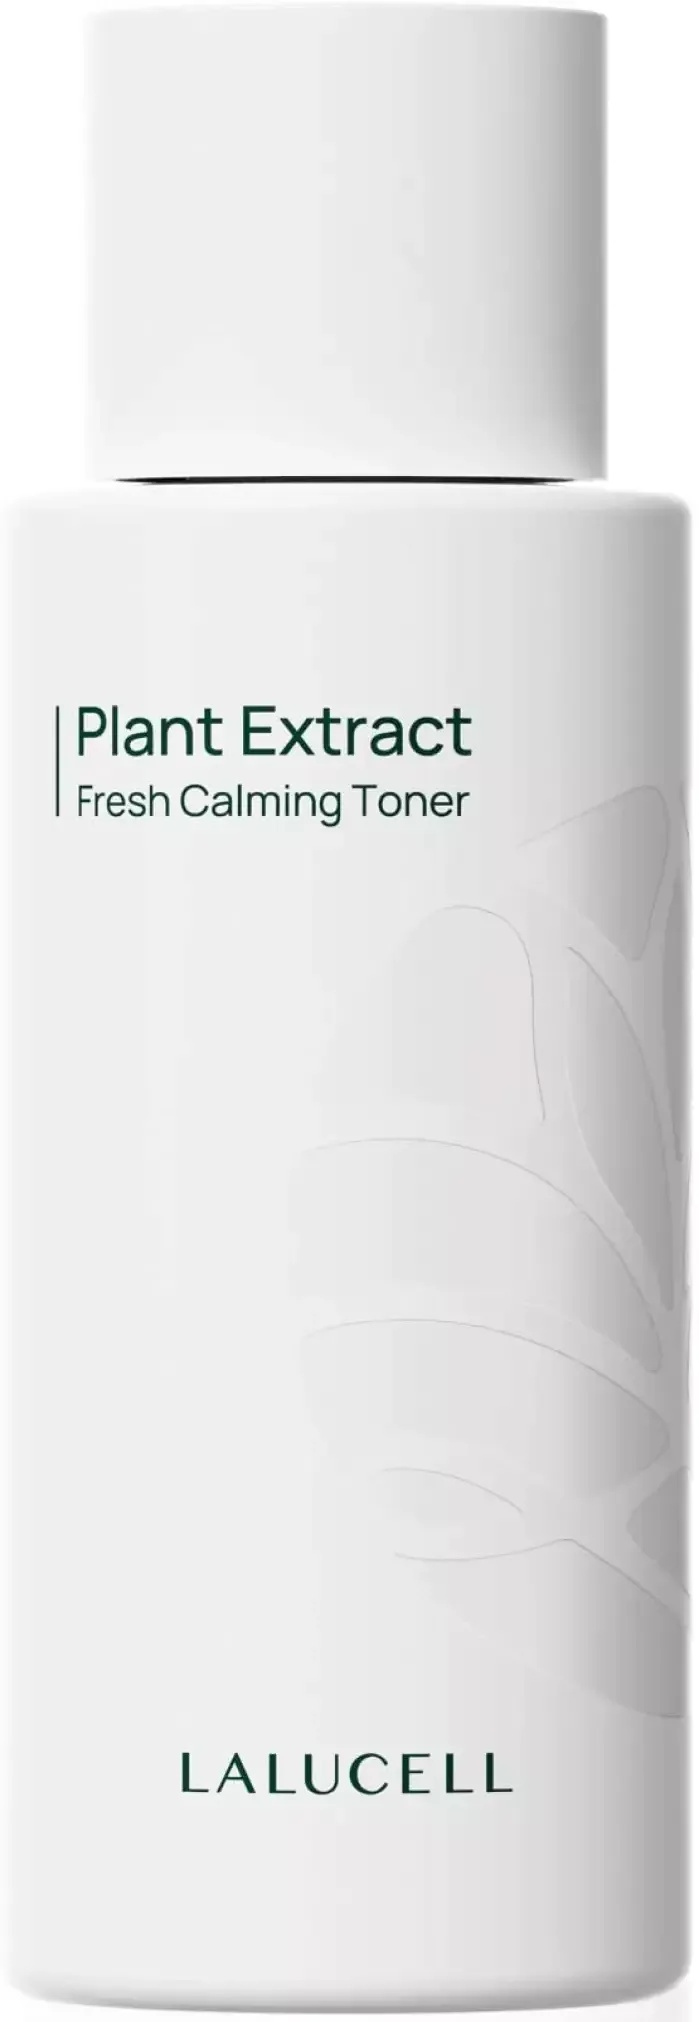 LALUCELL Plant Extract Fresh Calming Toner